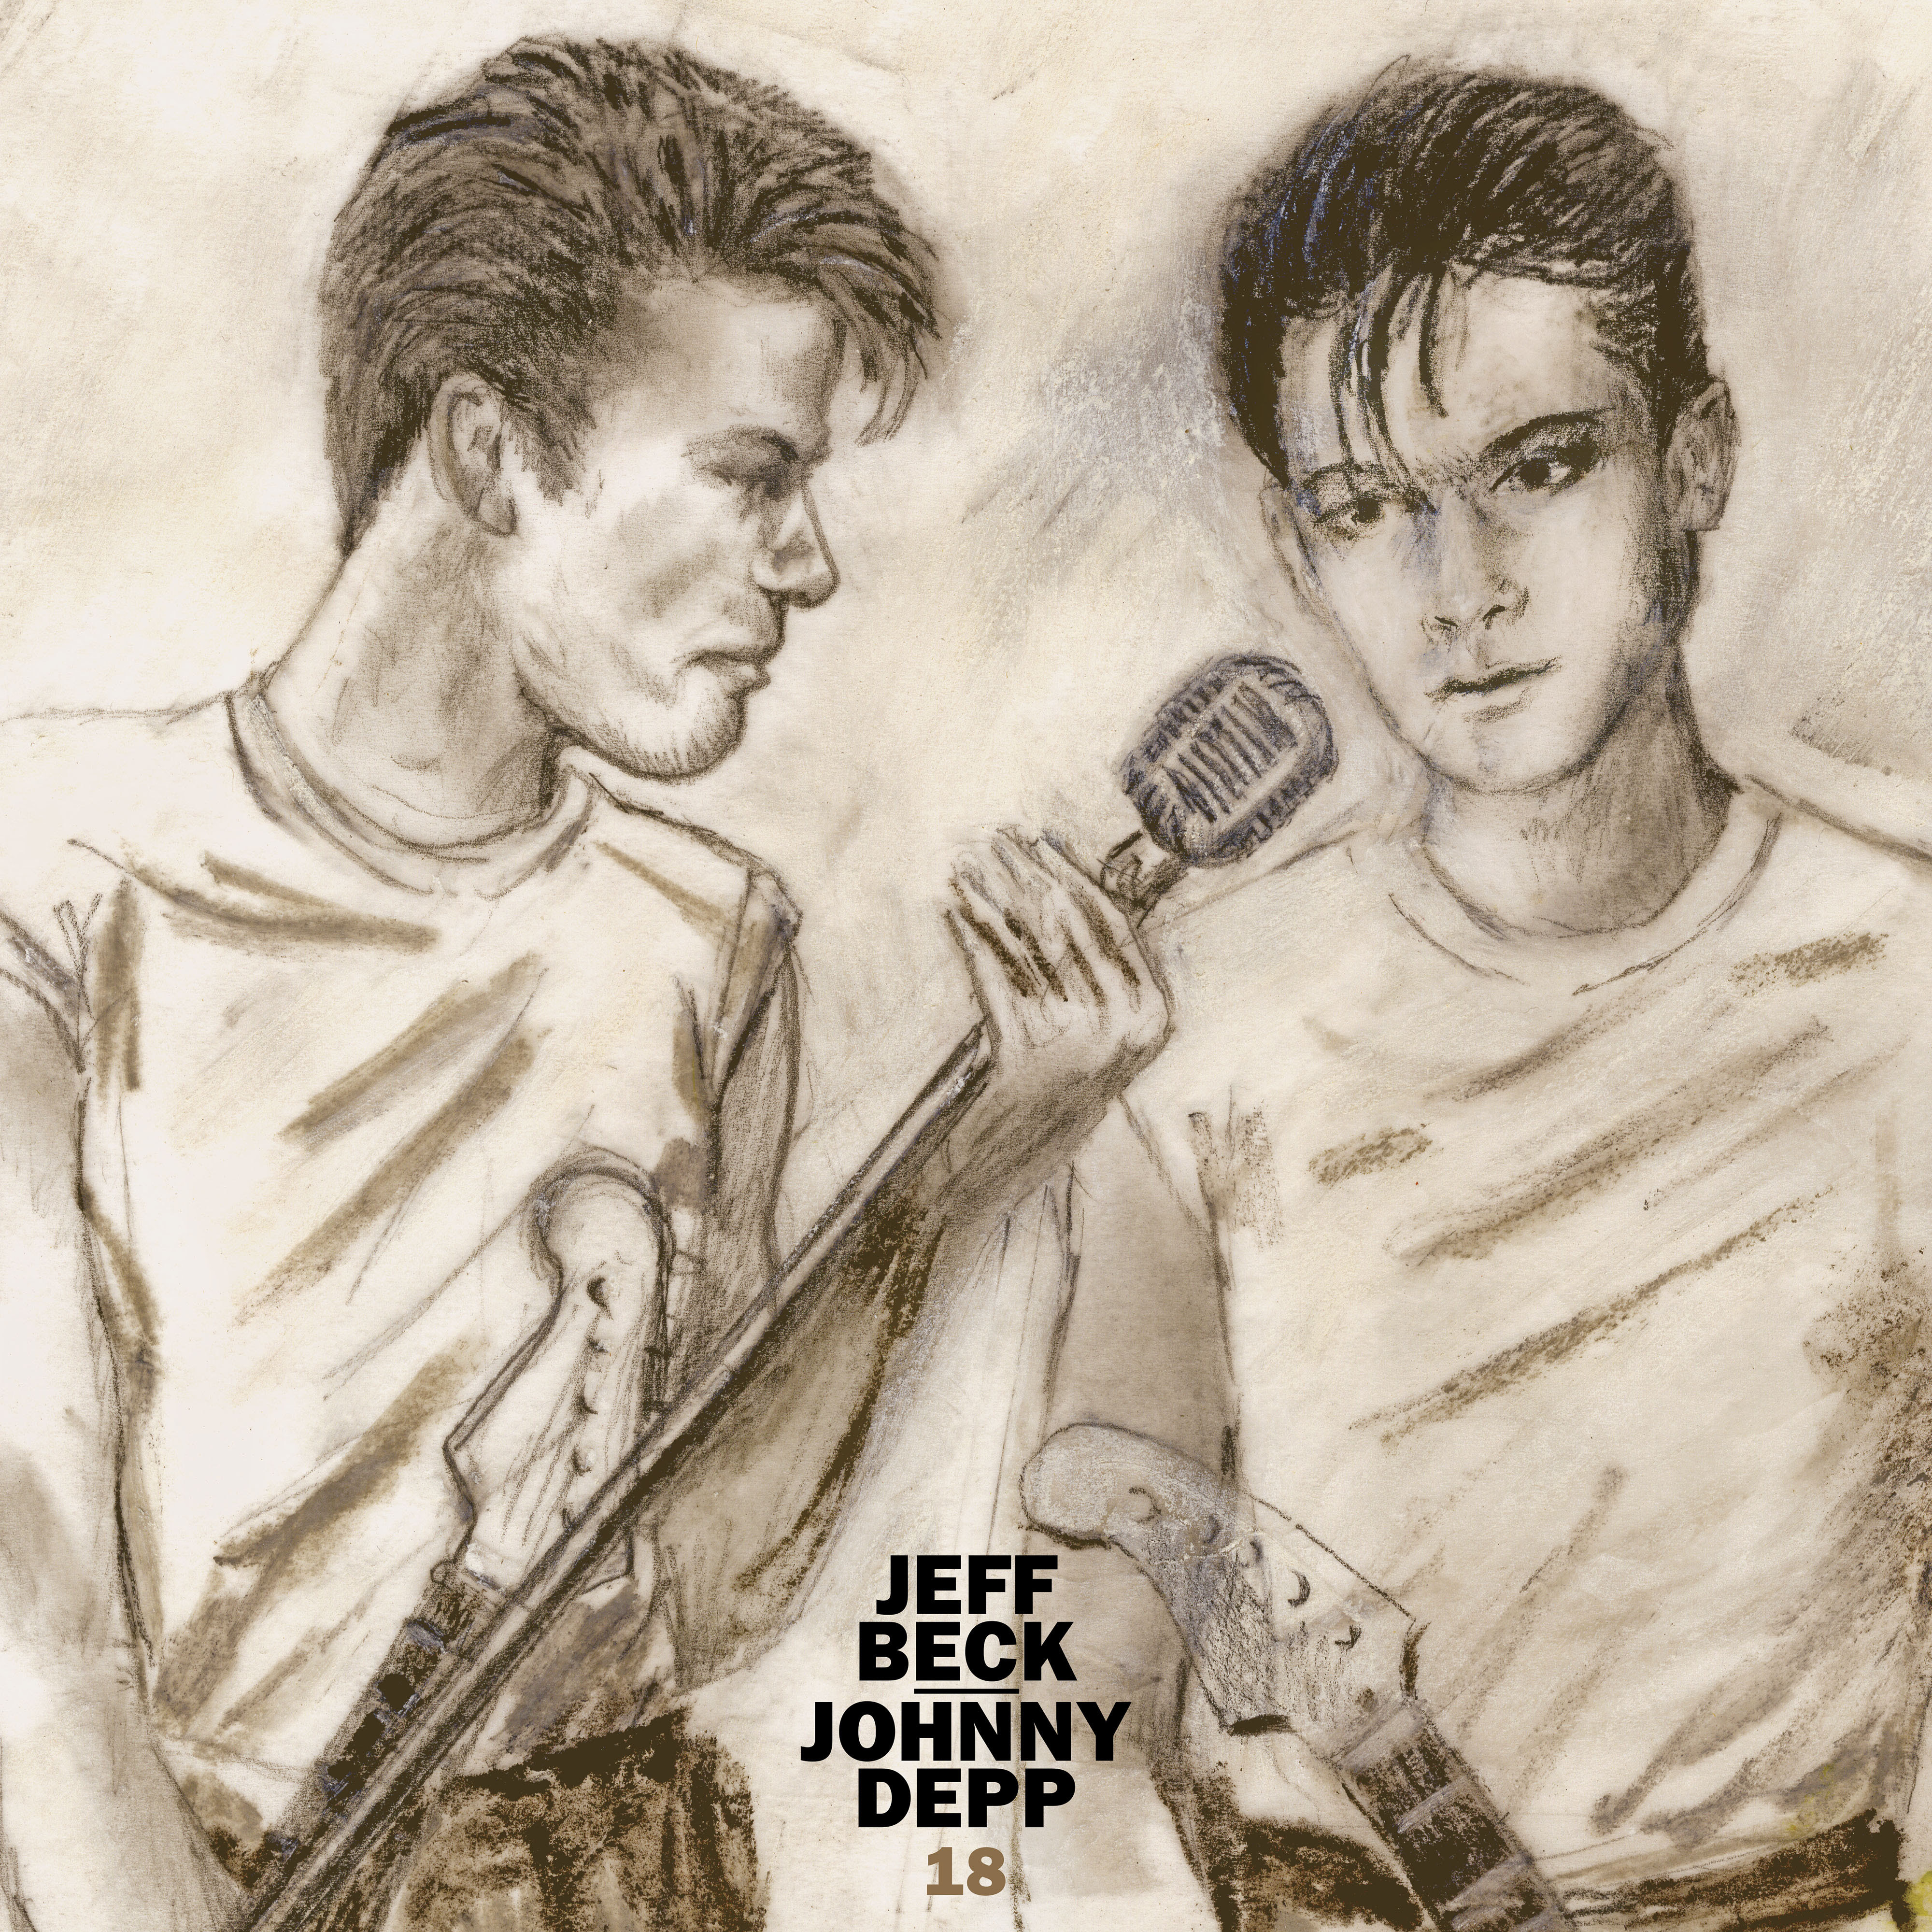 JEFF BECK and JOHNNY DEPP Release "18"